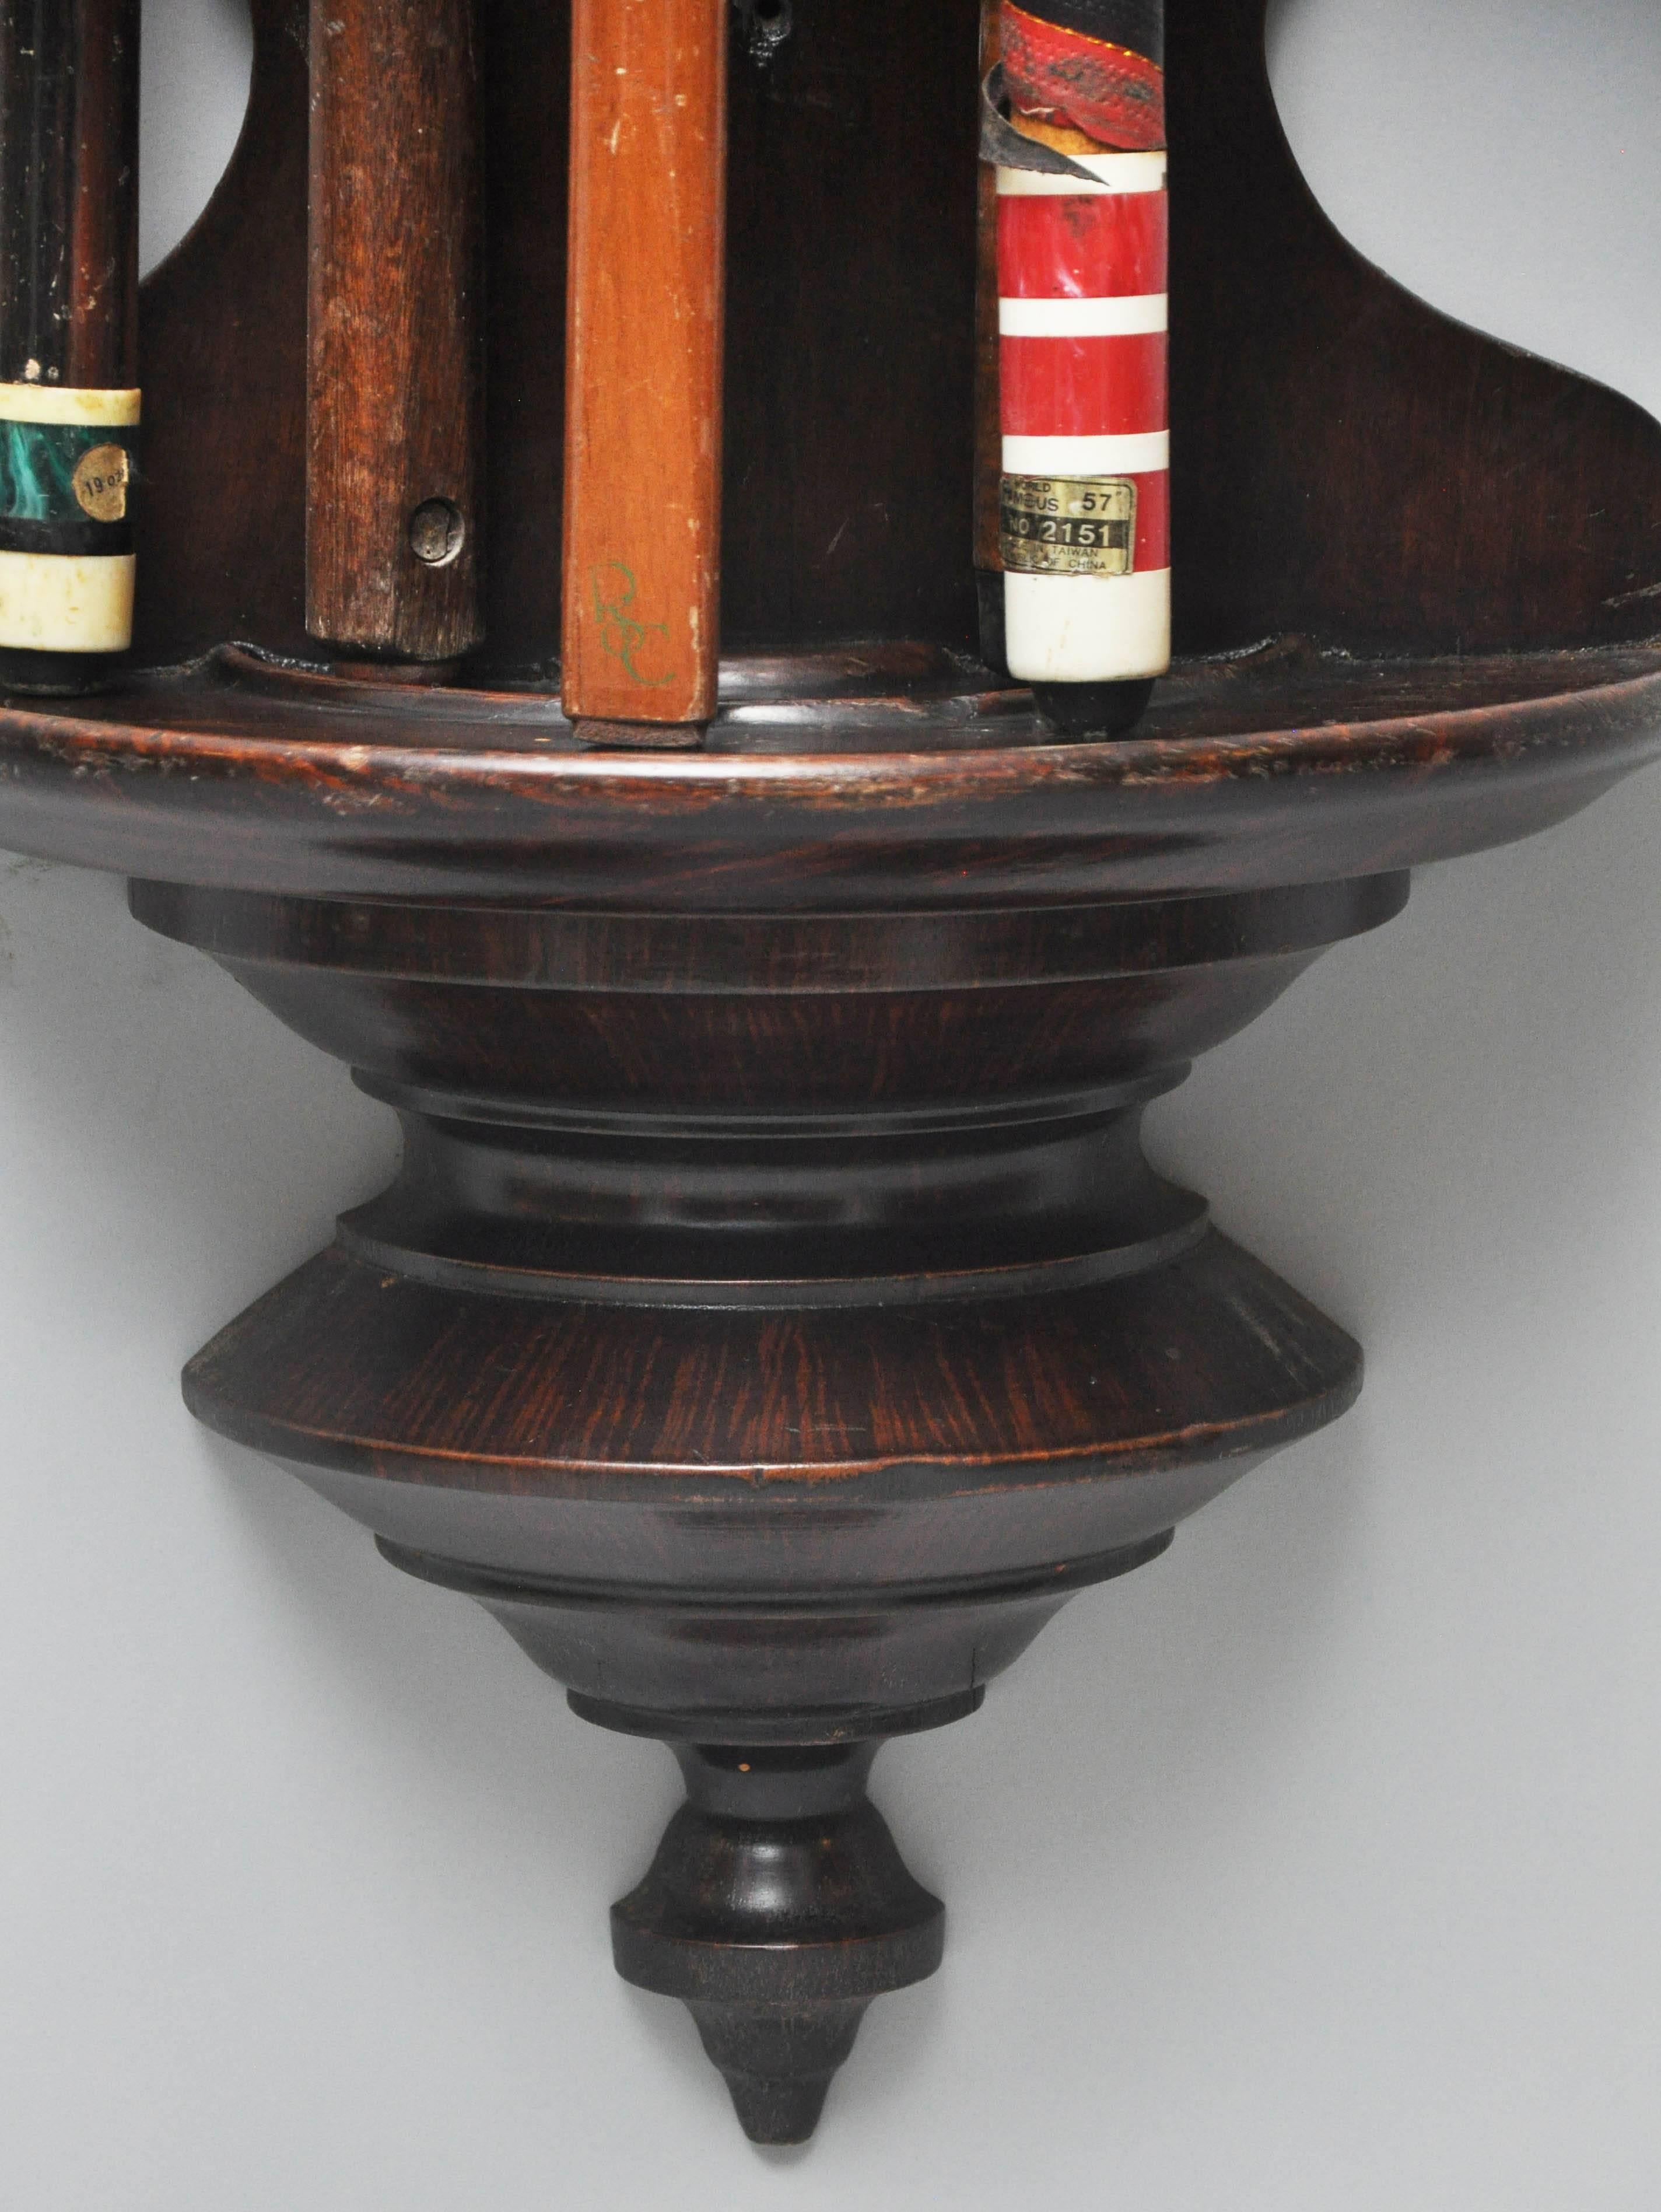 19th century flamed mahogany snooker / billiards wall cue rack, supported on a turned pedestal, holds up to 14 cues.